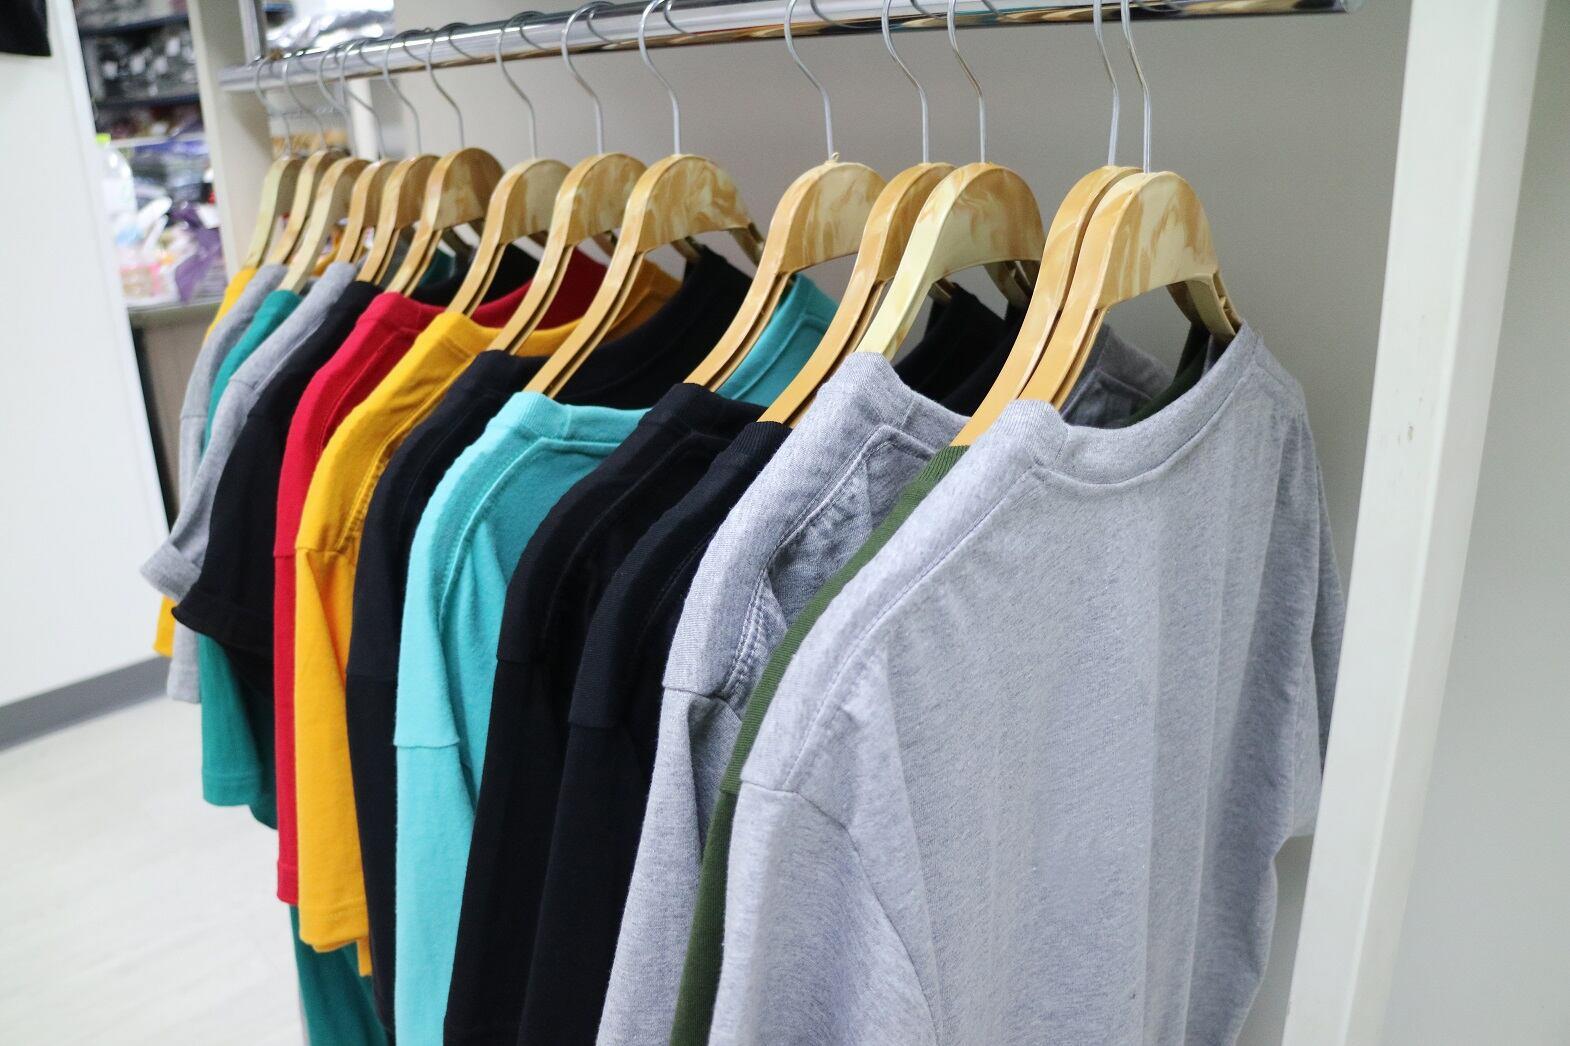 An Insight into the Dynamics of the Global T-Shirt Import Market